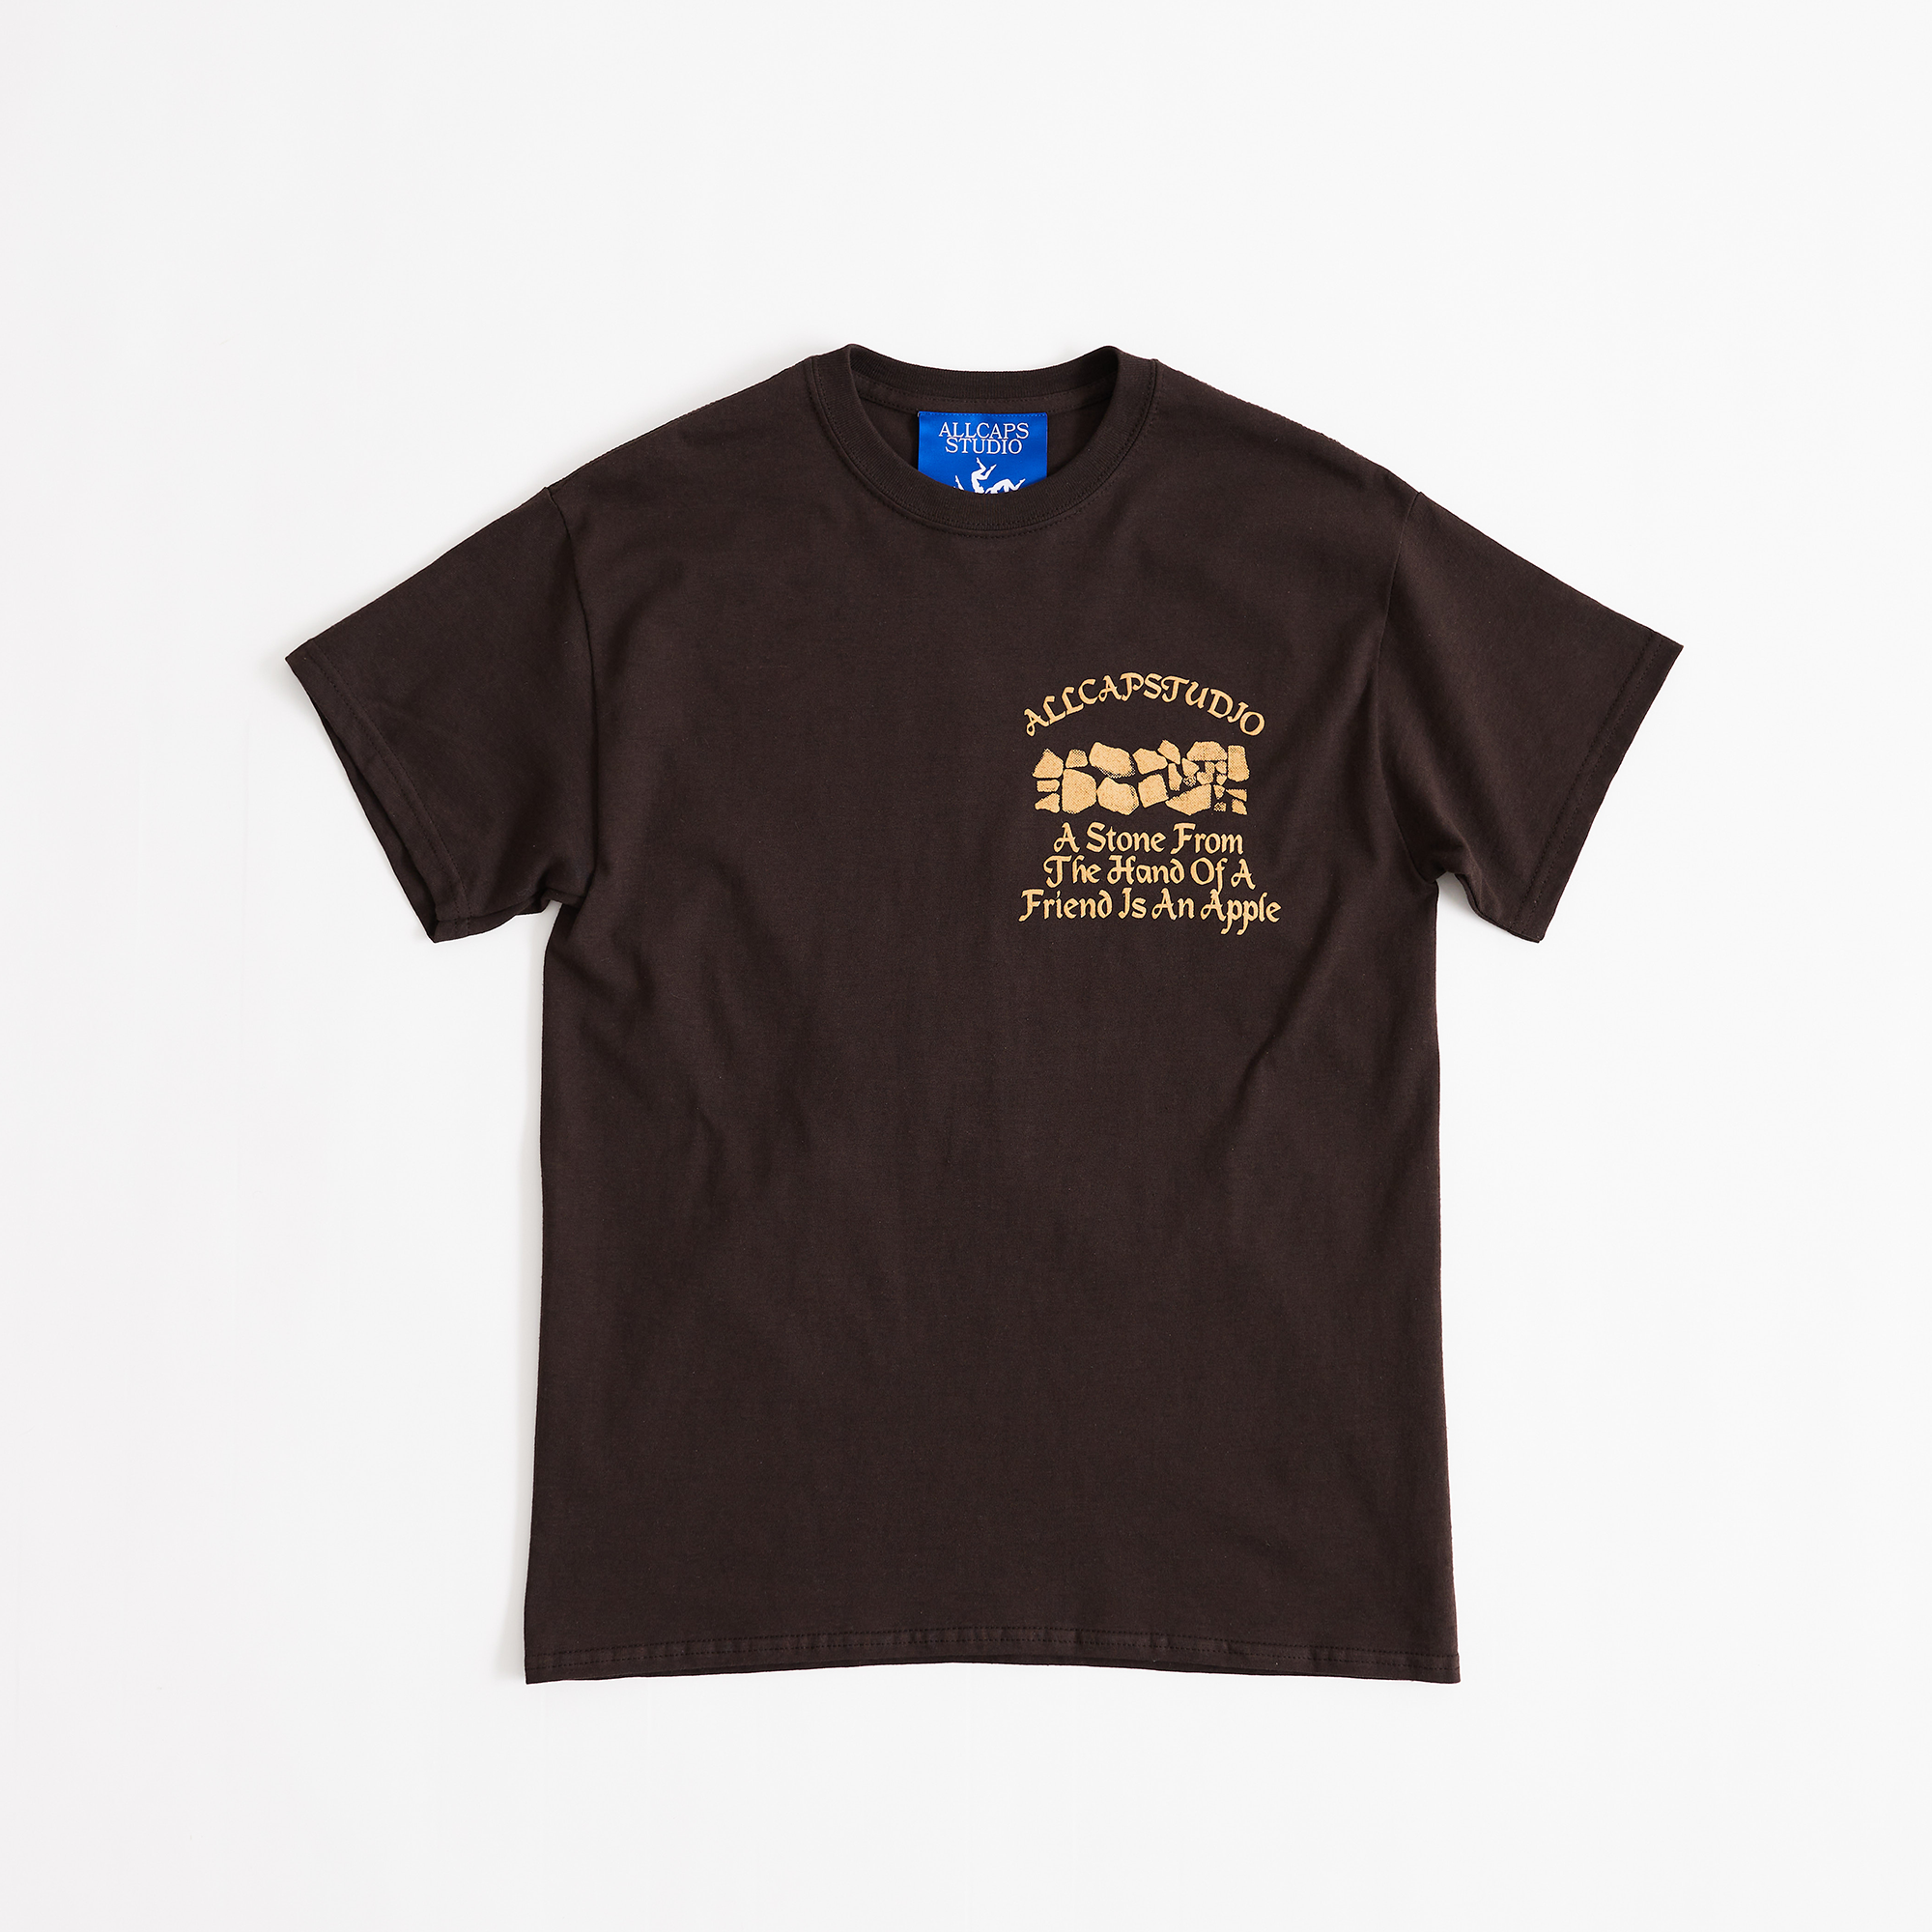 Hand of a Friend S/S T-shirt (Chocolate Brown)